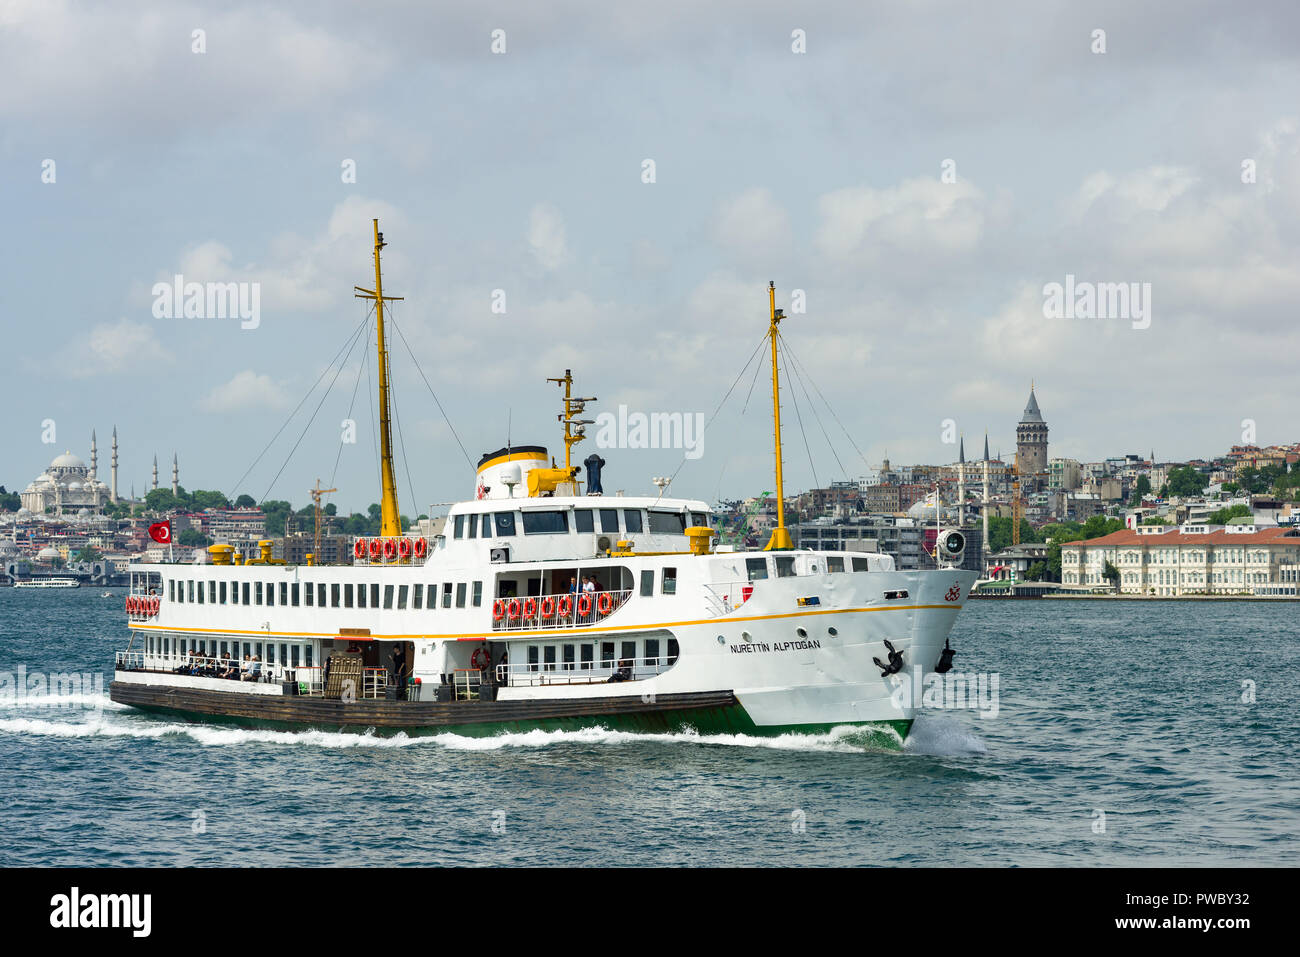 A large passenger ferry sailing on the Bosphorus with Galata Tower and Suleymaniye mosque in the background, Istanbul, Turkey Stock Photo